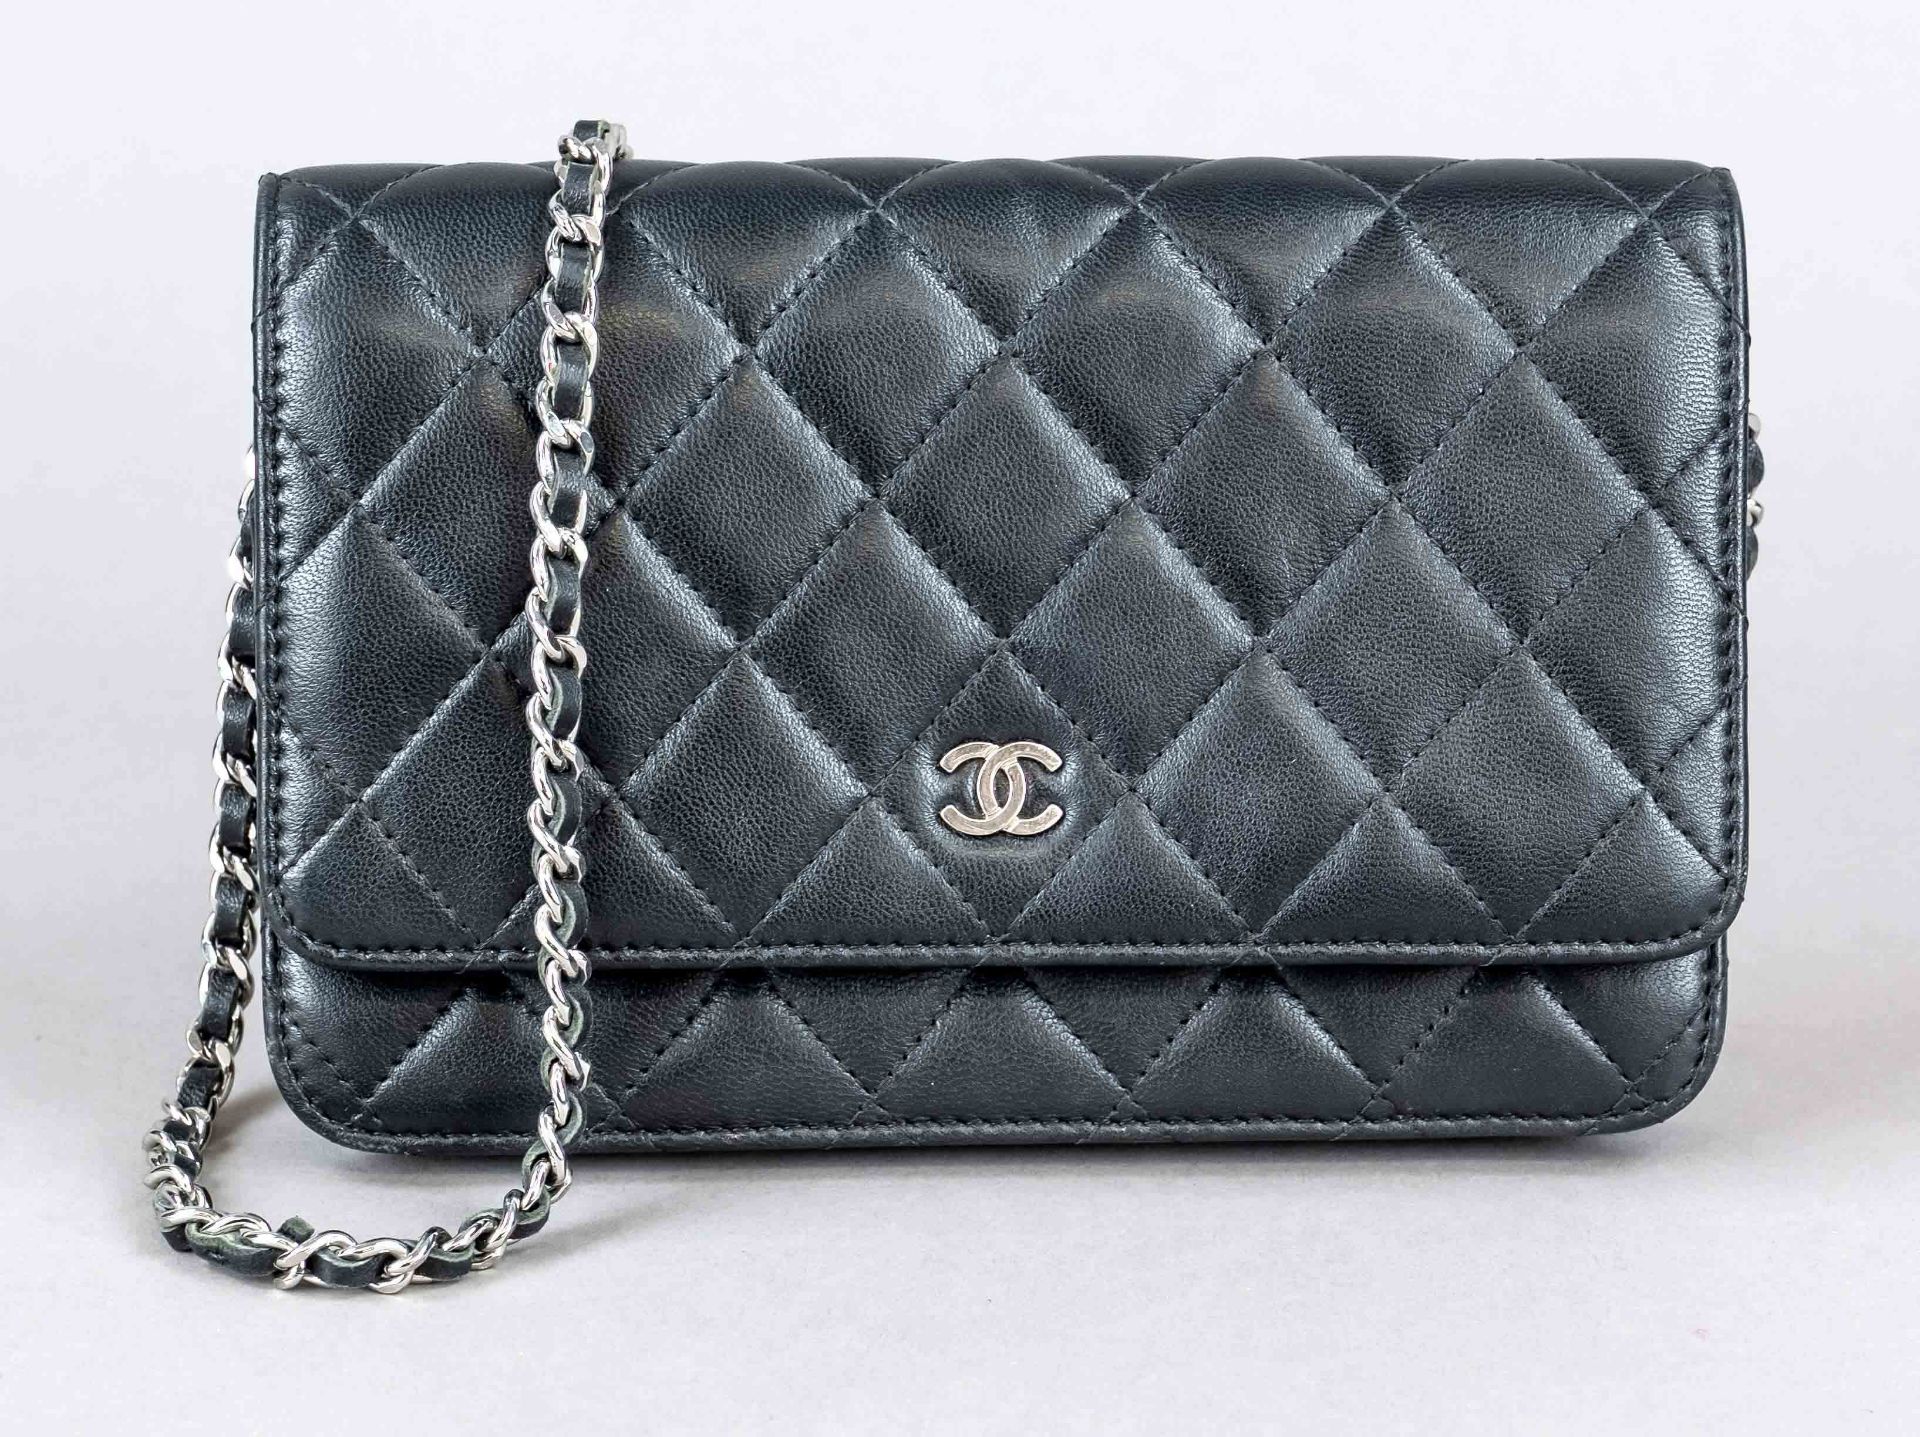 Chanel, Black Quilted Lambskin Classic Wallet On Chain Bag, black quilted lambskin in the brand's